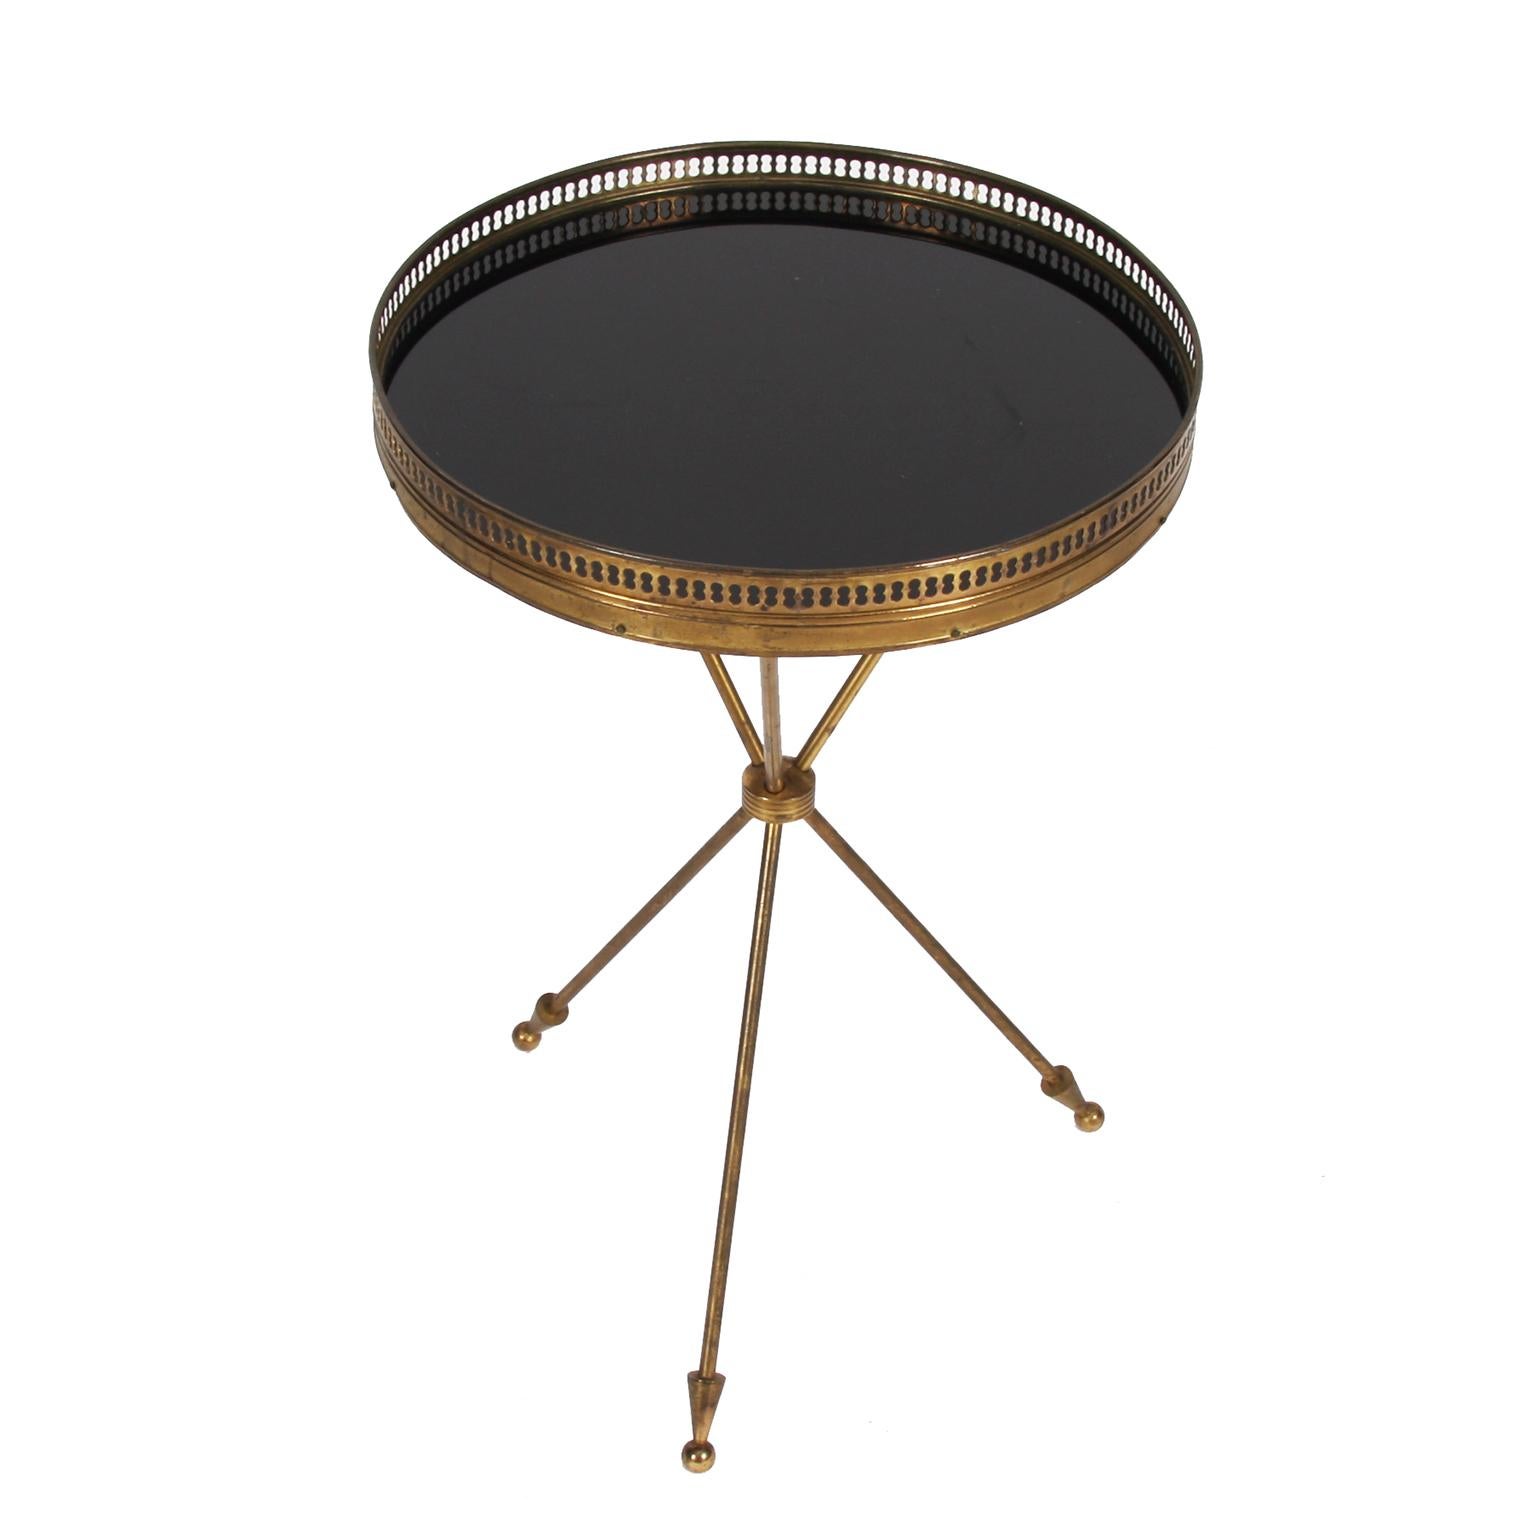 French, 1960s

A brass and black glass side table in the style of Bagues. 

With tripod base and galleried top.